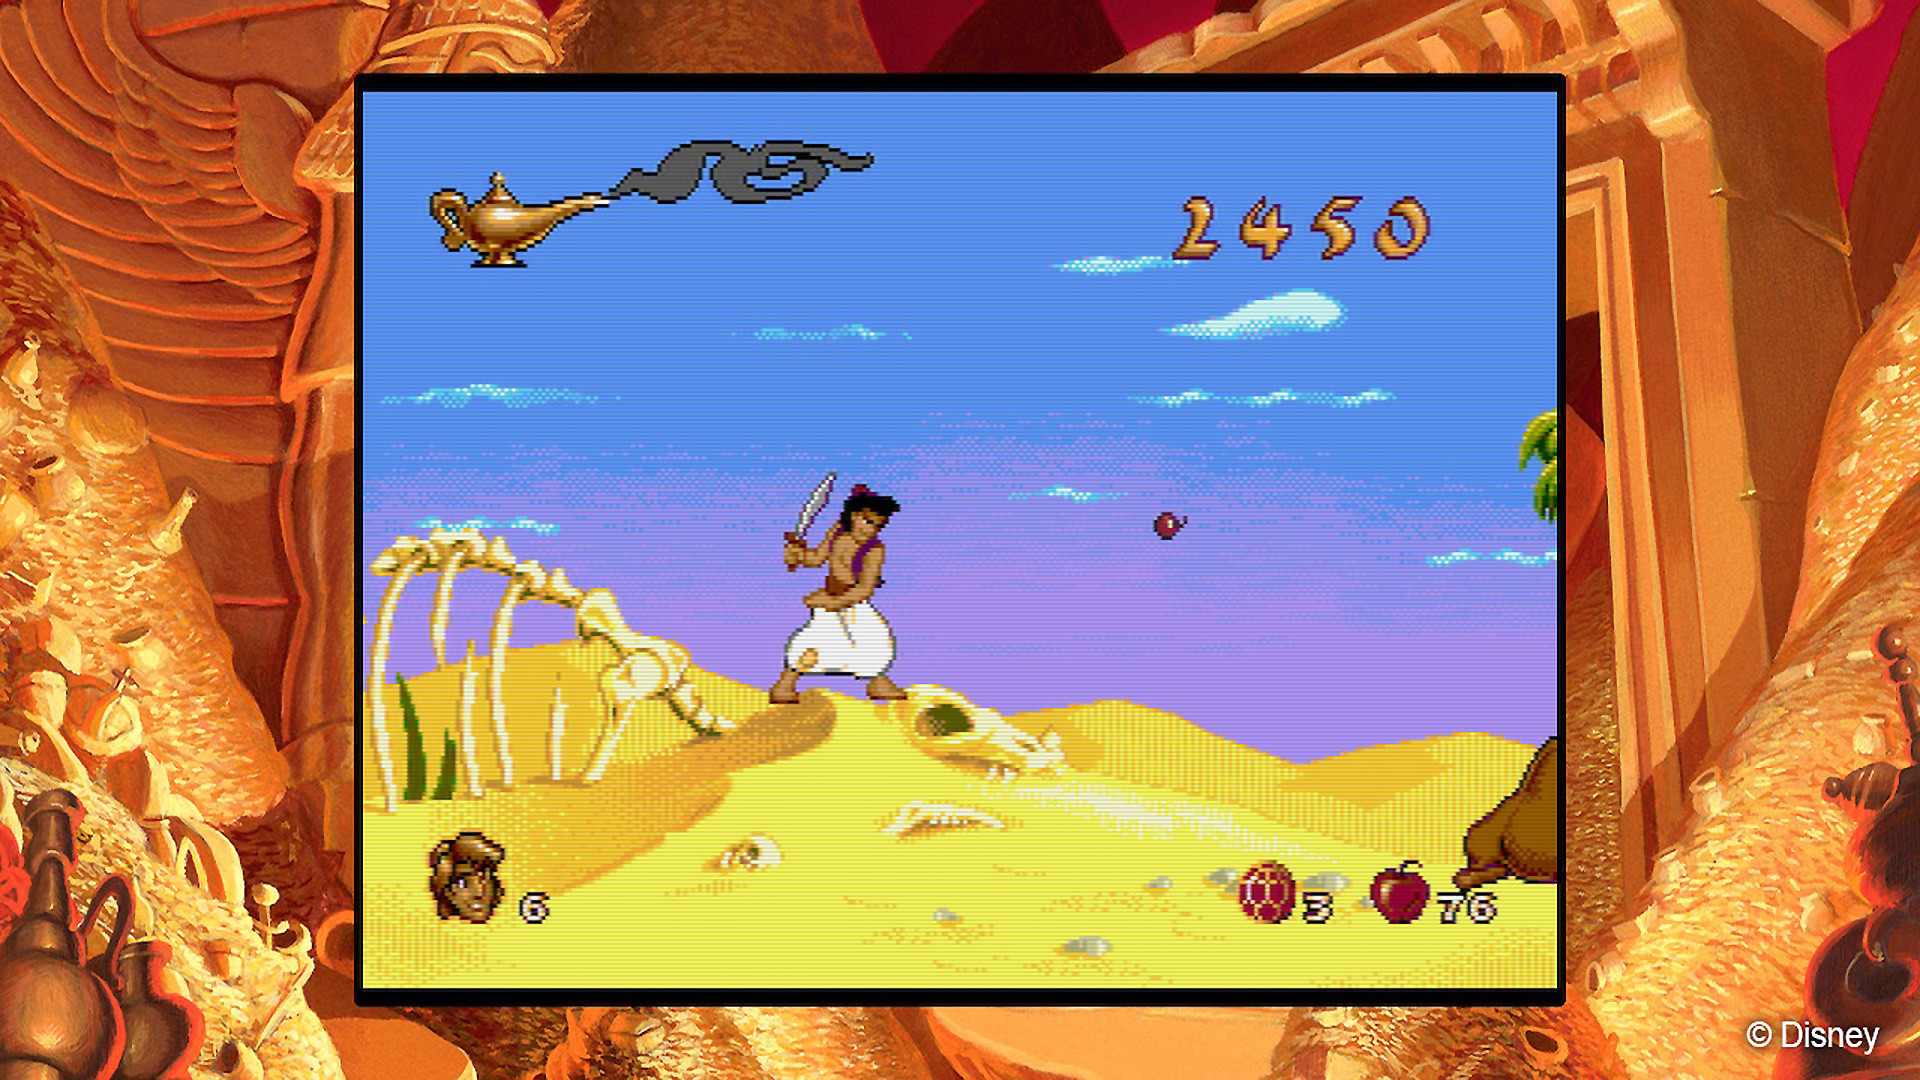 Find the best laptops for Disney Classic Games: Aladdin and The Lion King